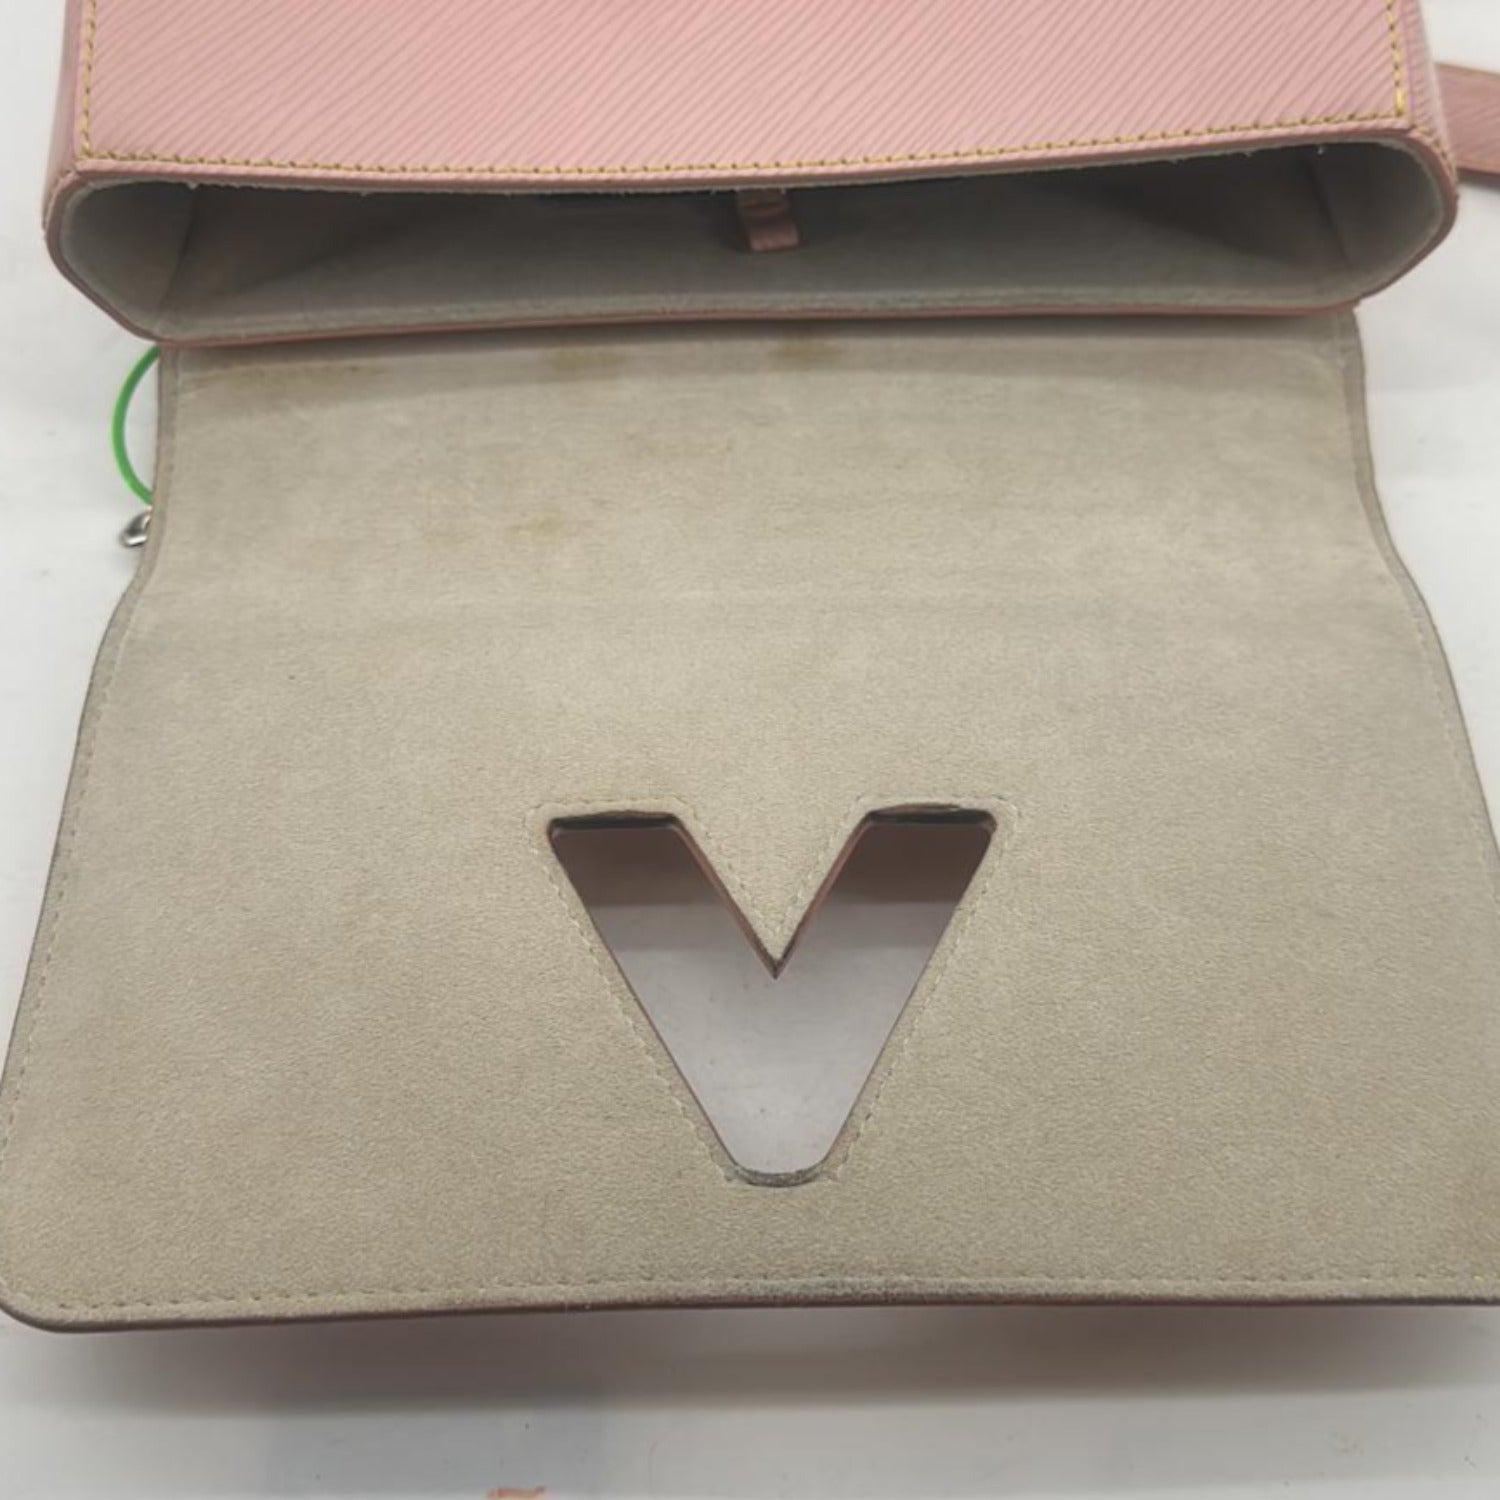 Louis Vuitton Limited Edition Light Pink EPI Leather by The Pool Twist mm Bag